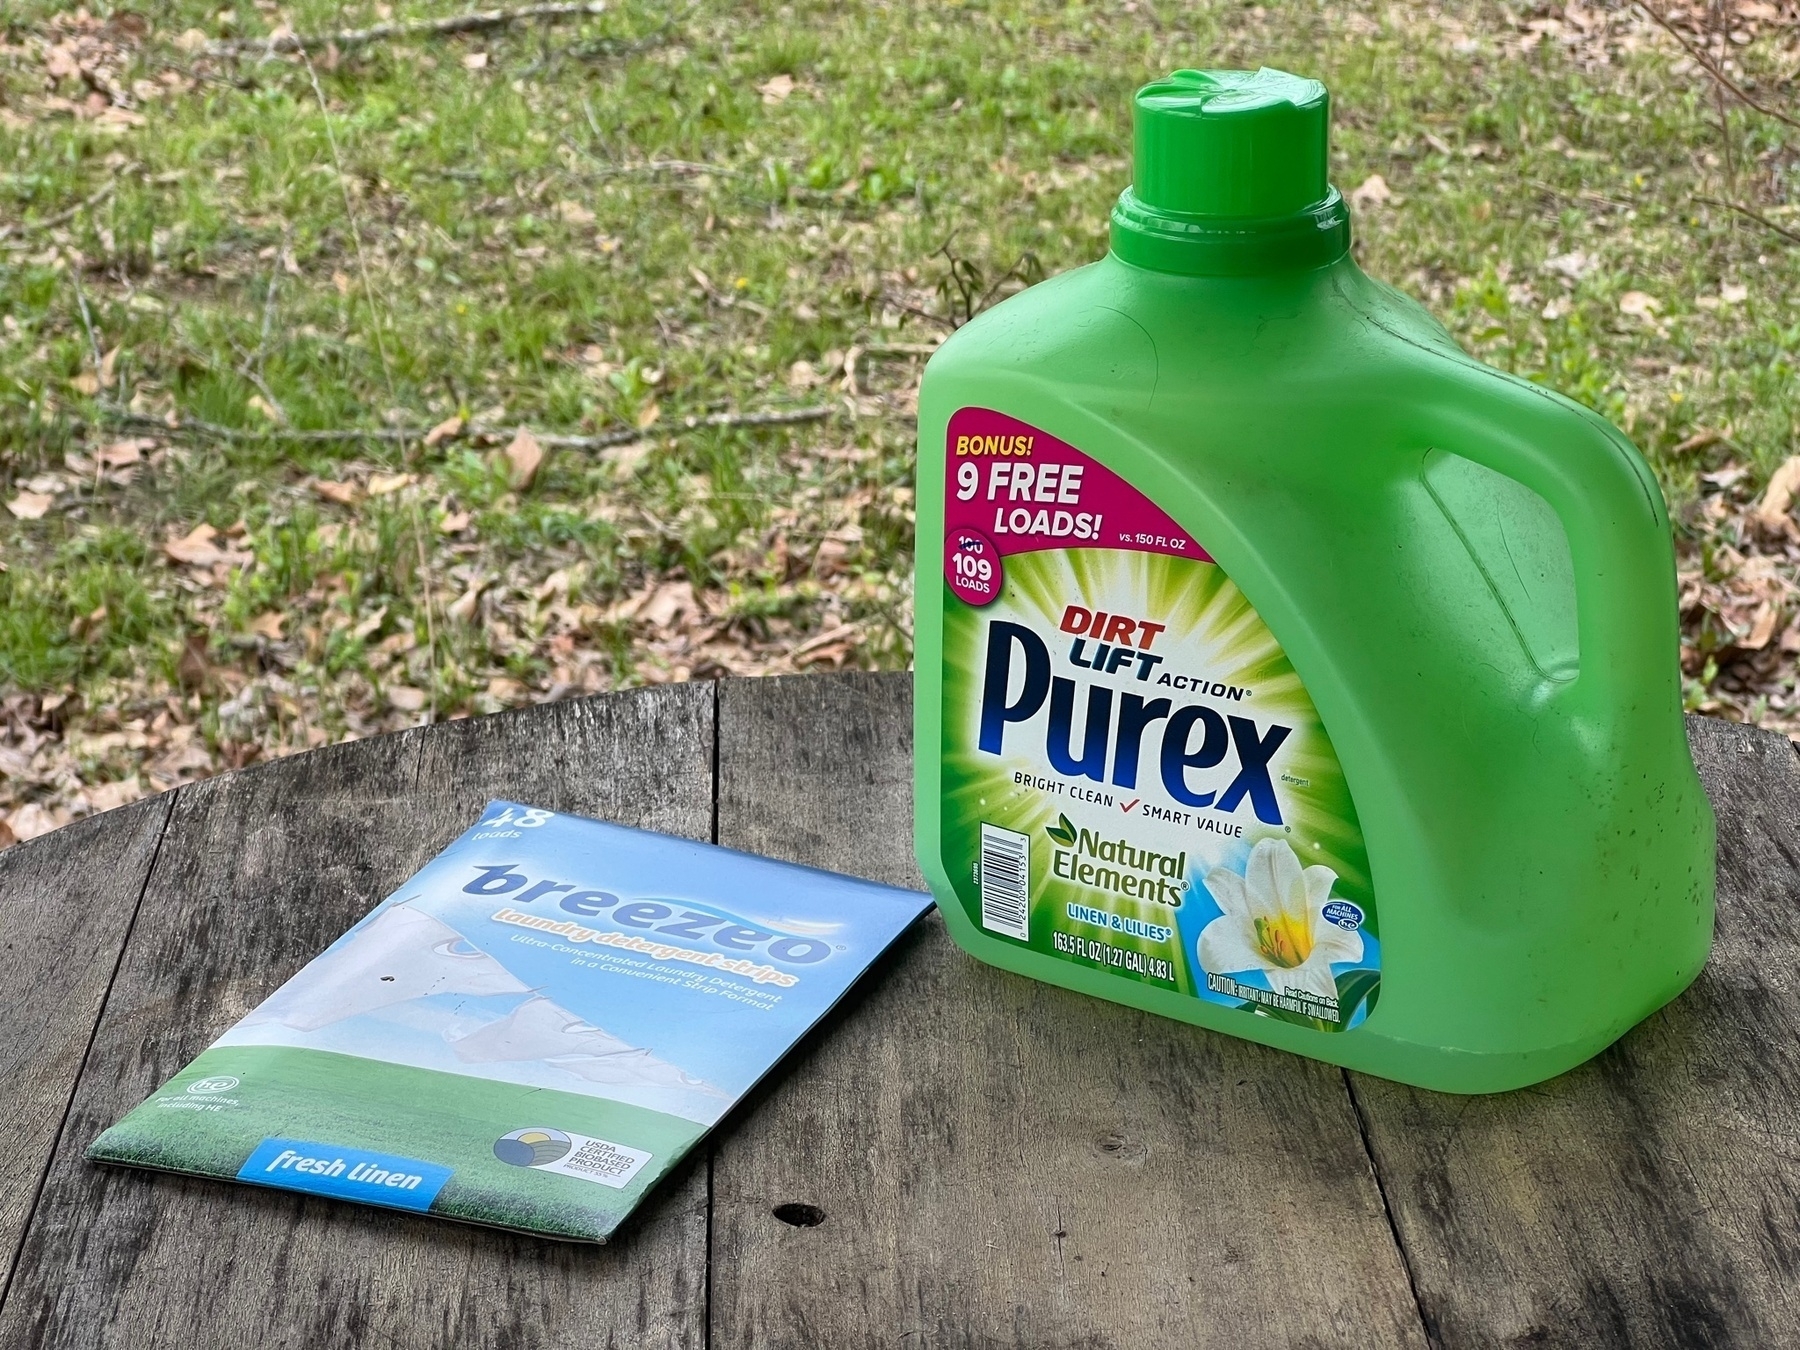 a paper board container of laundry detergent strips is in slim package sitting on the table next to a green plastic jug of liquid laundry detergent.